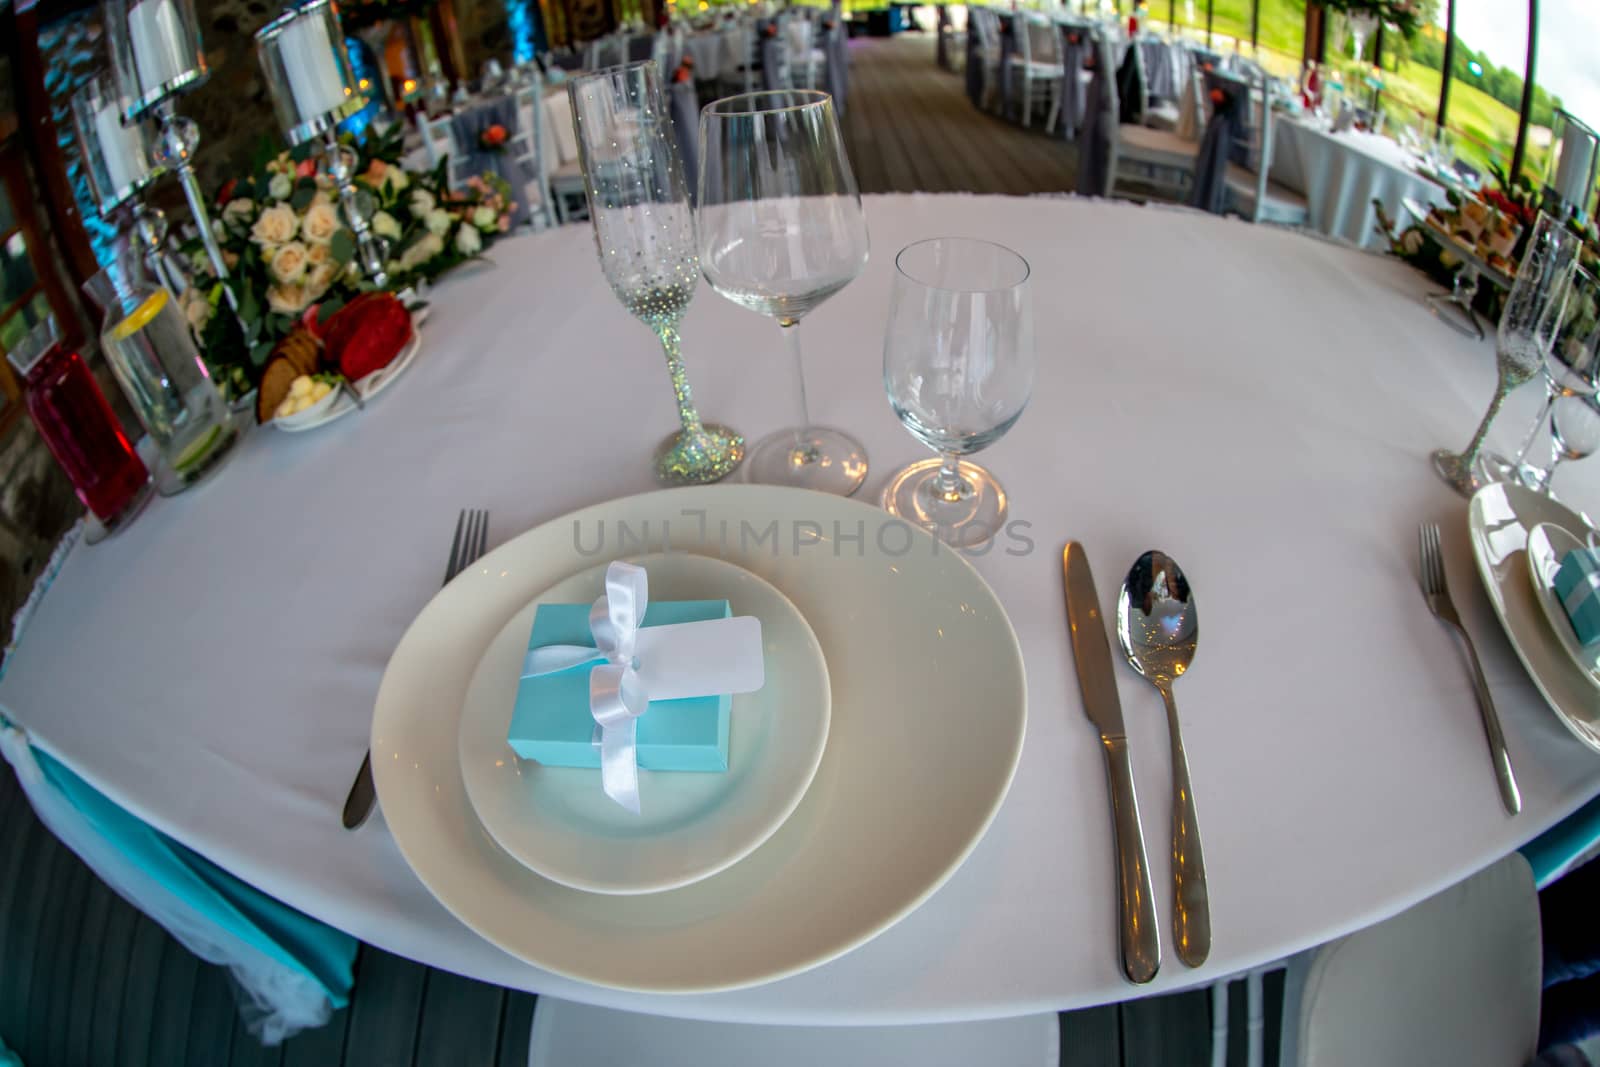 Table setting with handmade gift box on plate, glasses, forks, spoons and knives for wedding reception. Festive decorations and items for food, arranged on the table. Light blue gift box in plates. Shot with fisheye lens. 